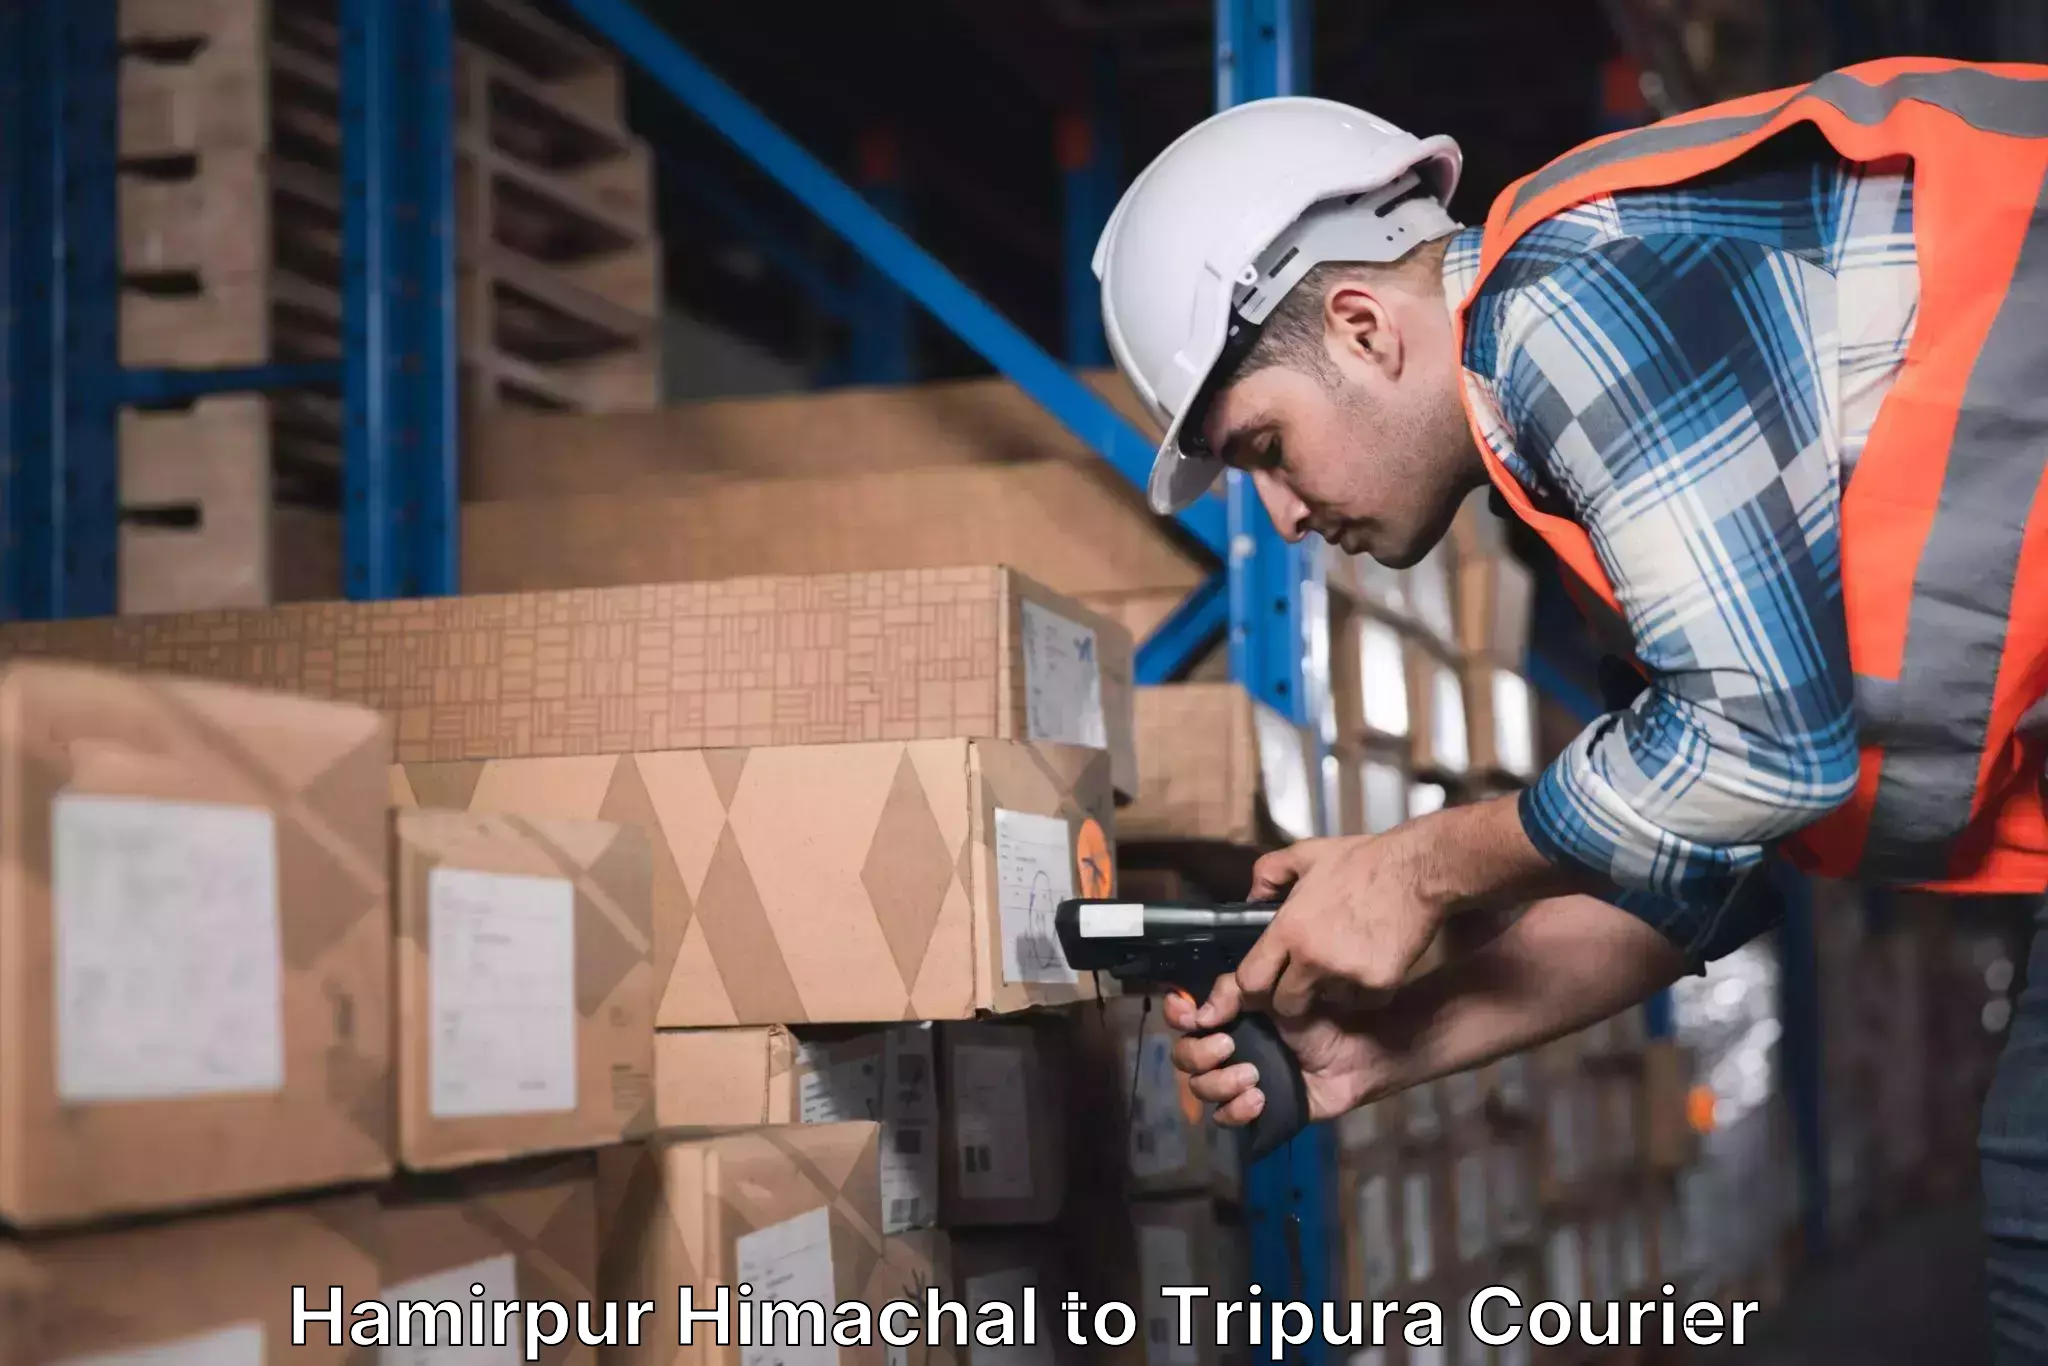 State-of-the-art courier technology Hamirpur Himachal to Tripura